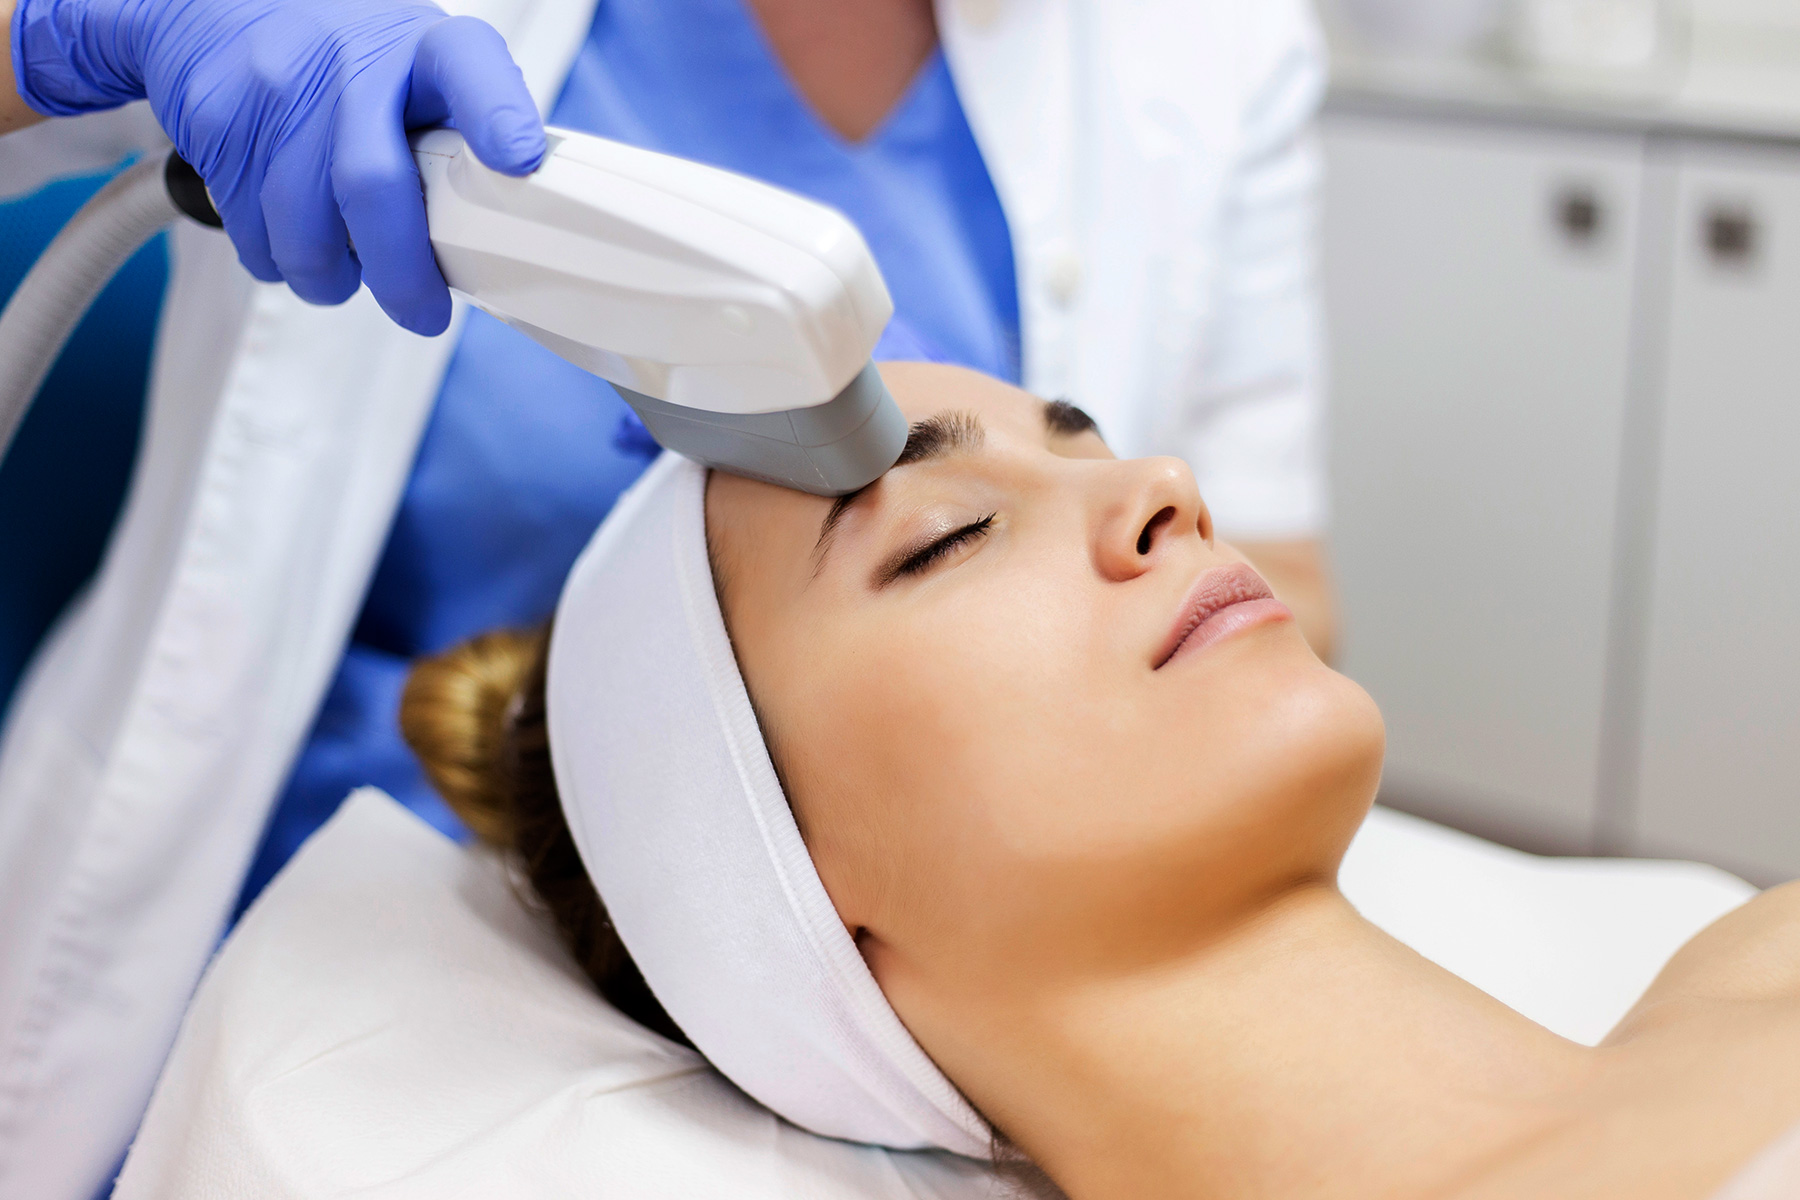 Laser and Intense Pulsed Light (IPL) Sources for Dermatology